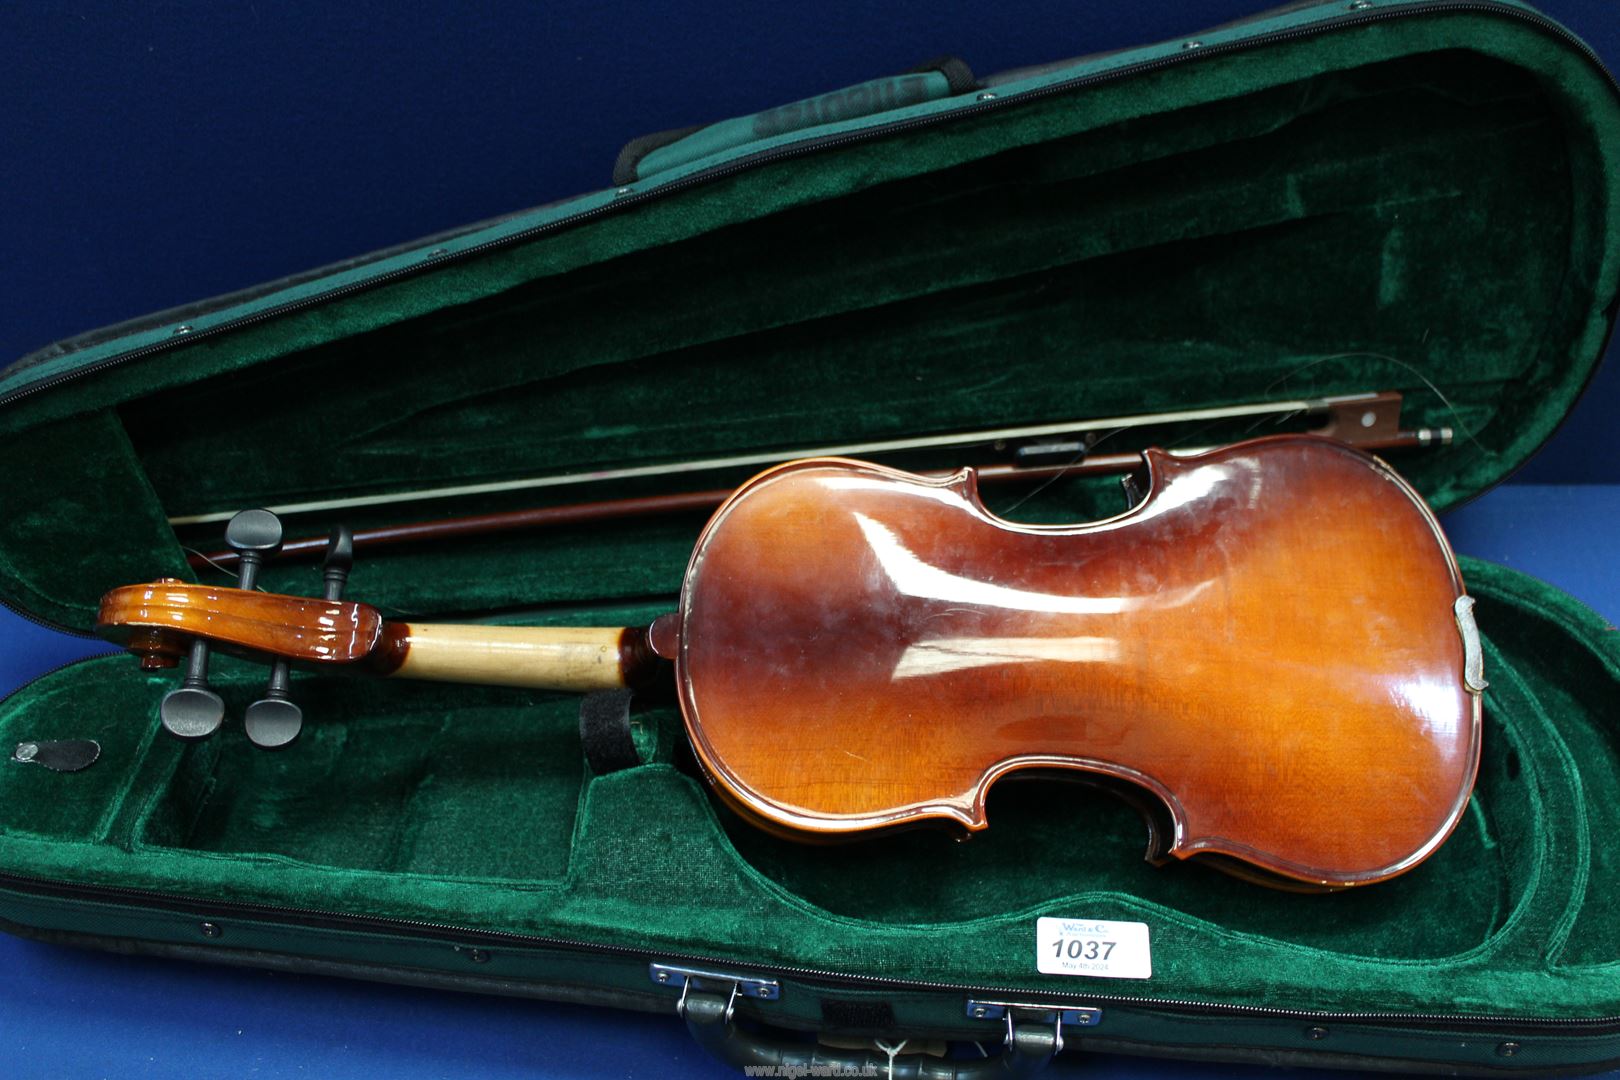 An Antoni Debut Violin in soft case, 21" long, with box, some strings missing. - Image 4 of 5